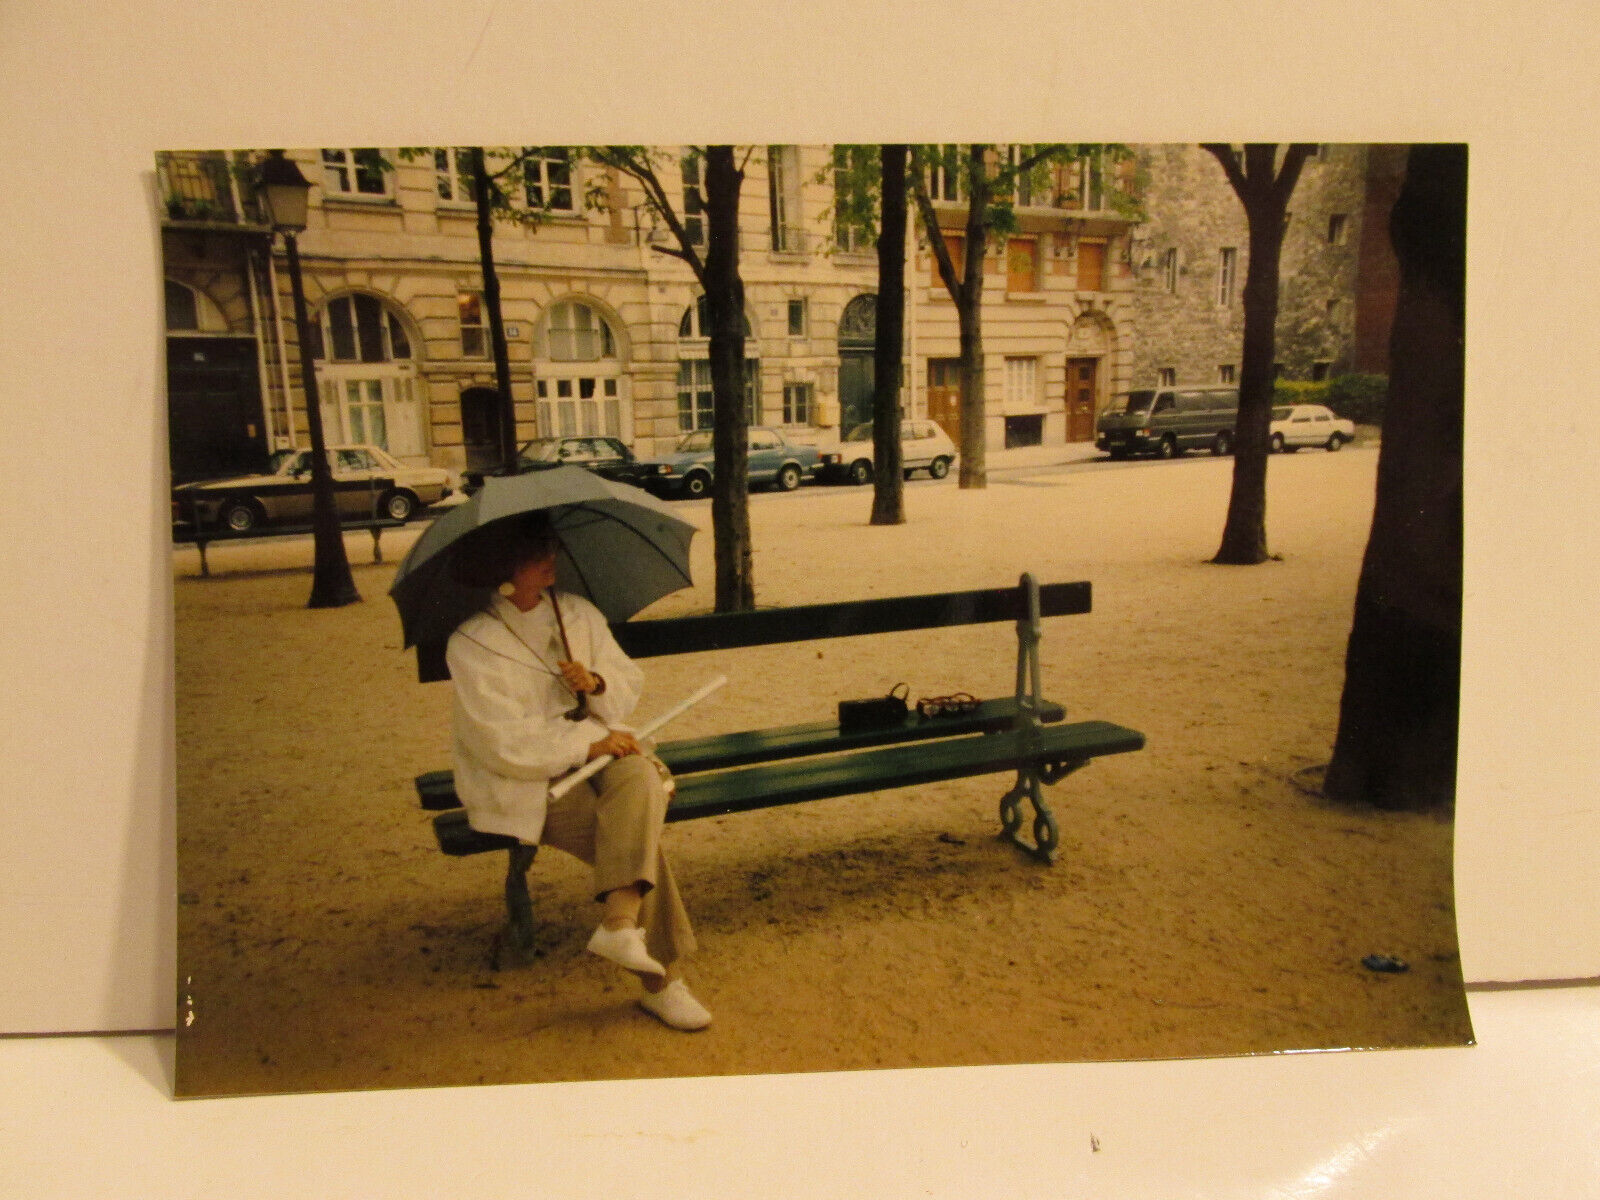 VINTAGE FOUND PHOTOGRAPH COLOR ART OLD PHOTO 1980S WOMAN BENCH UMBRELLA EUROPE